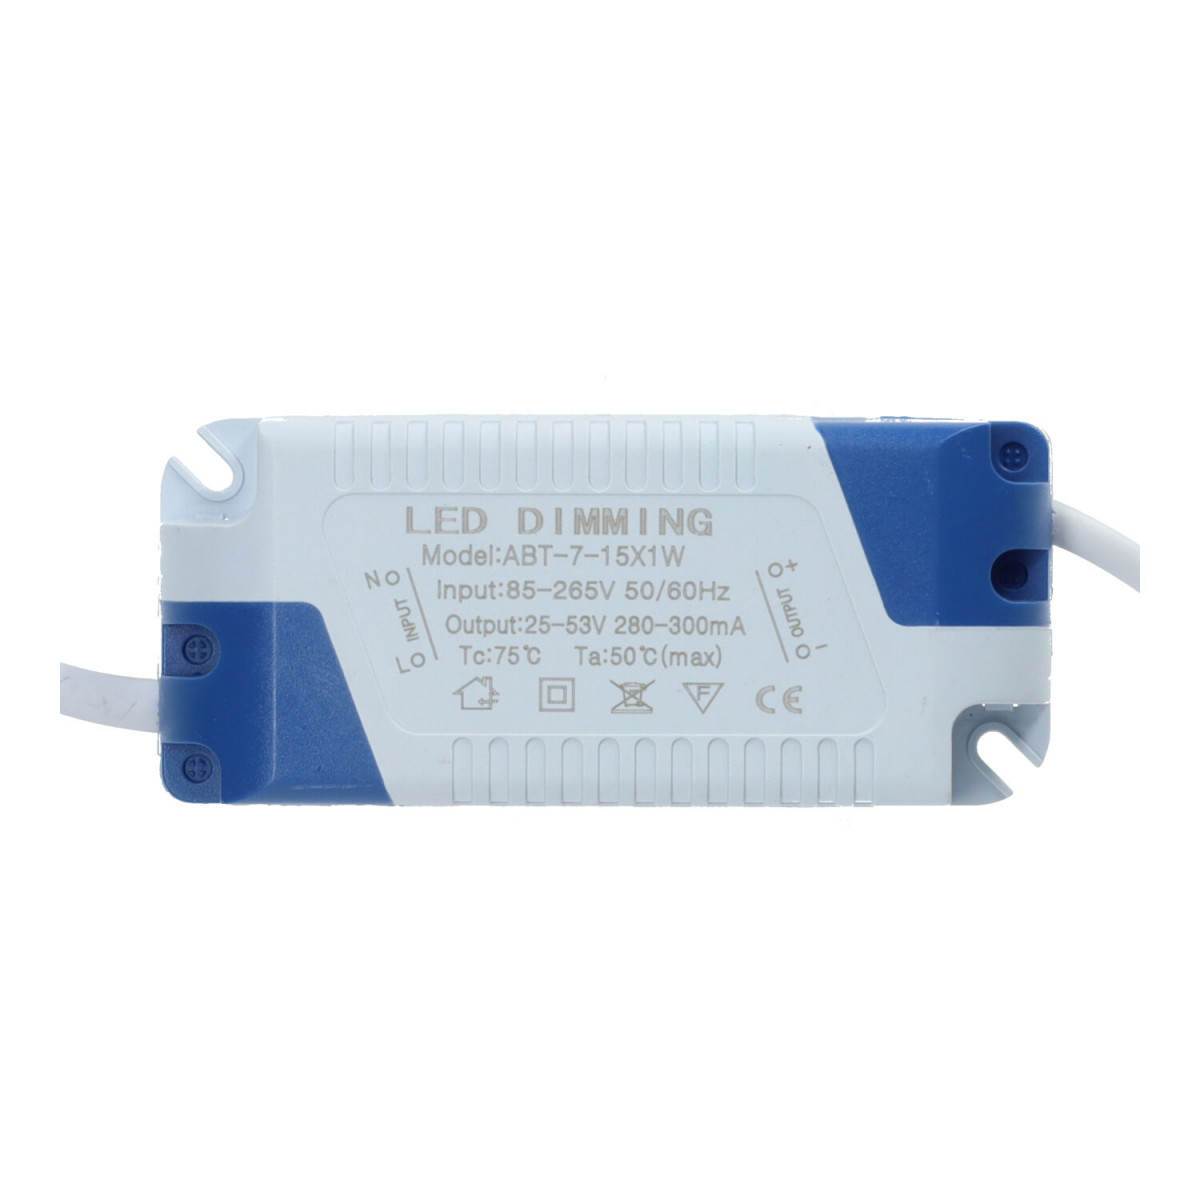 Driver for 6W to 15W LED Panels - DIMMABLE